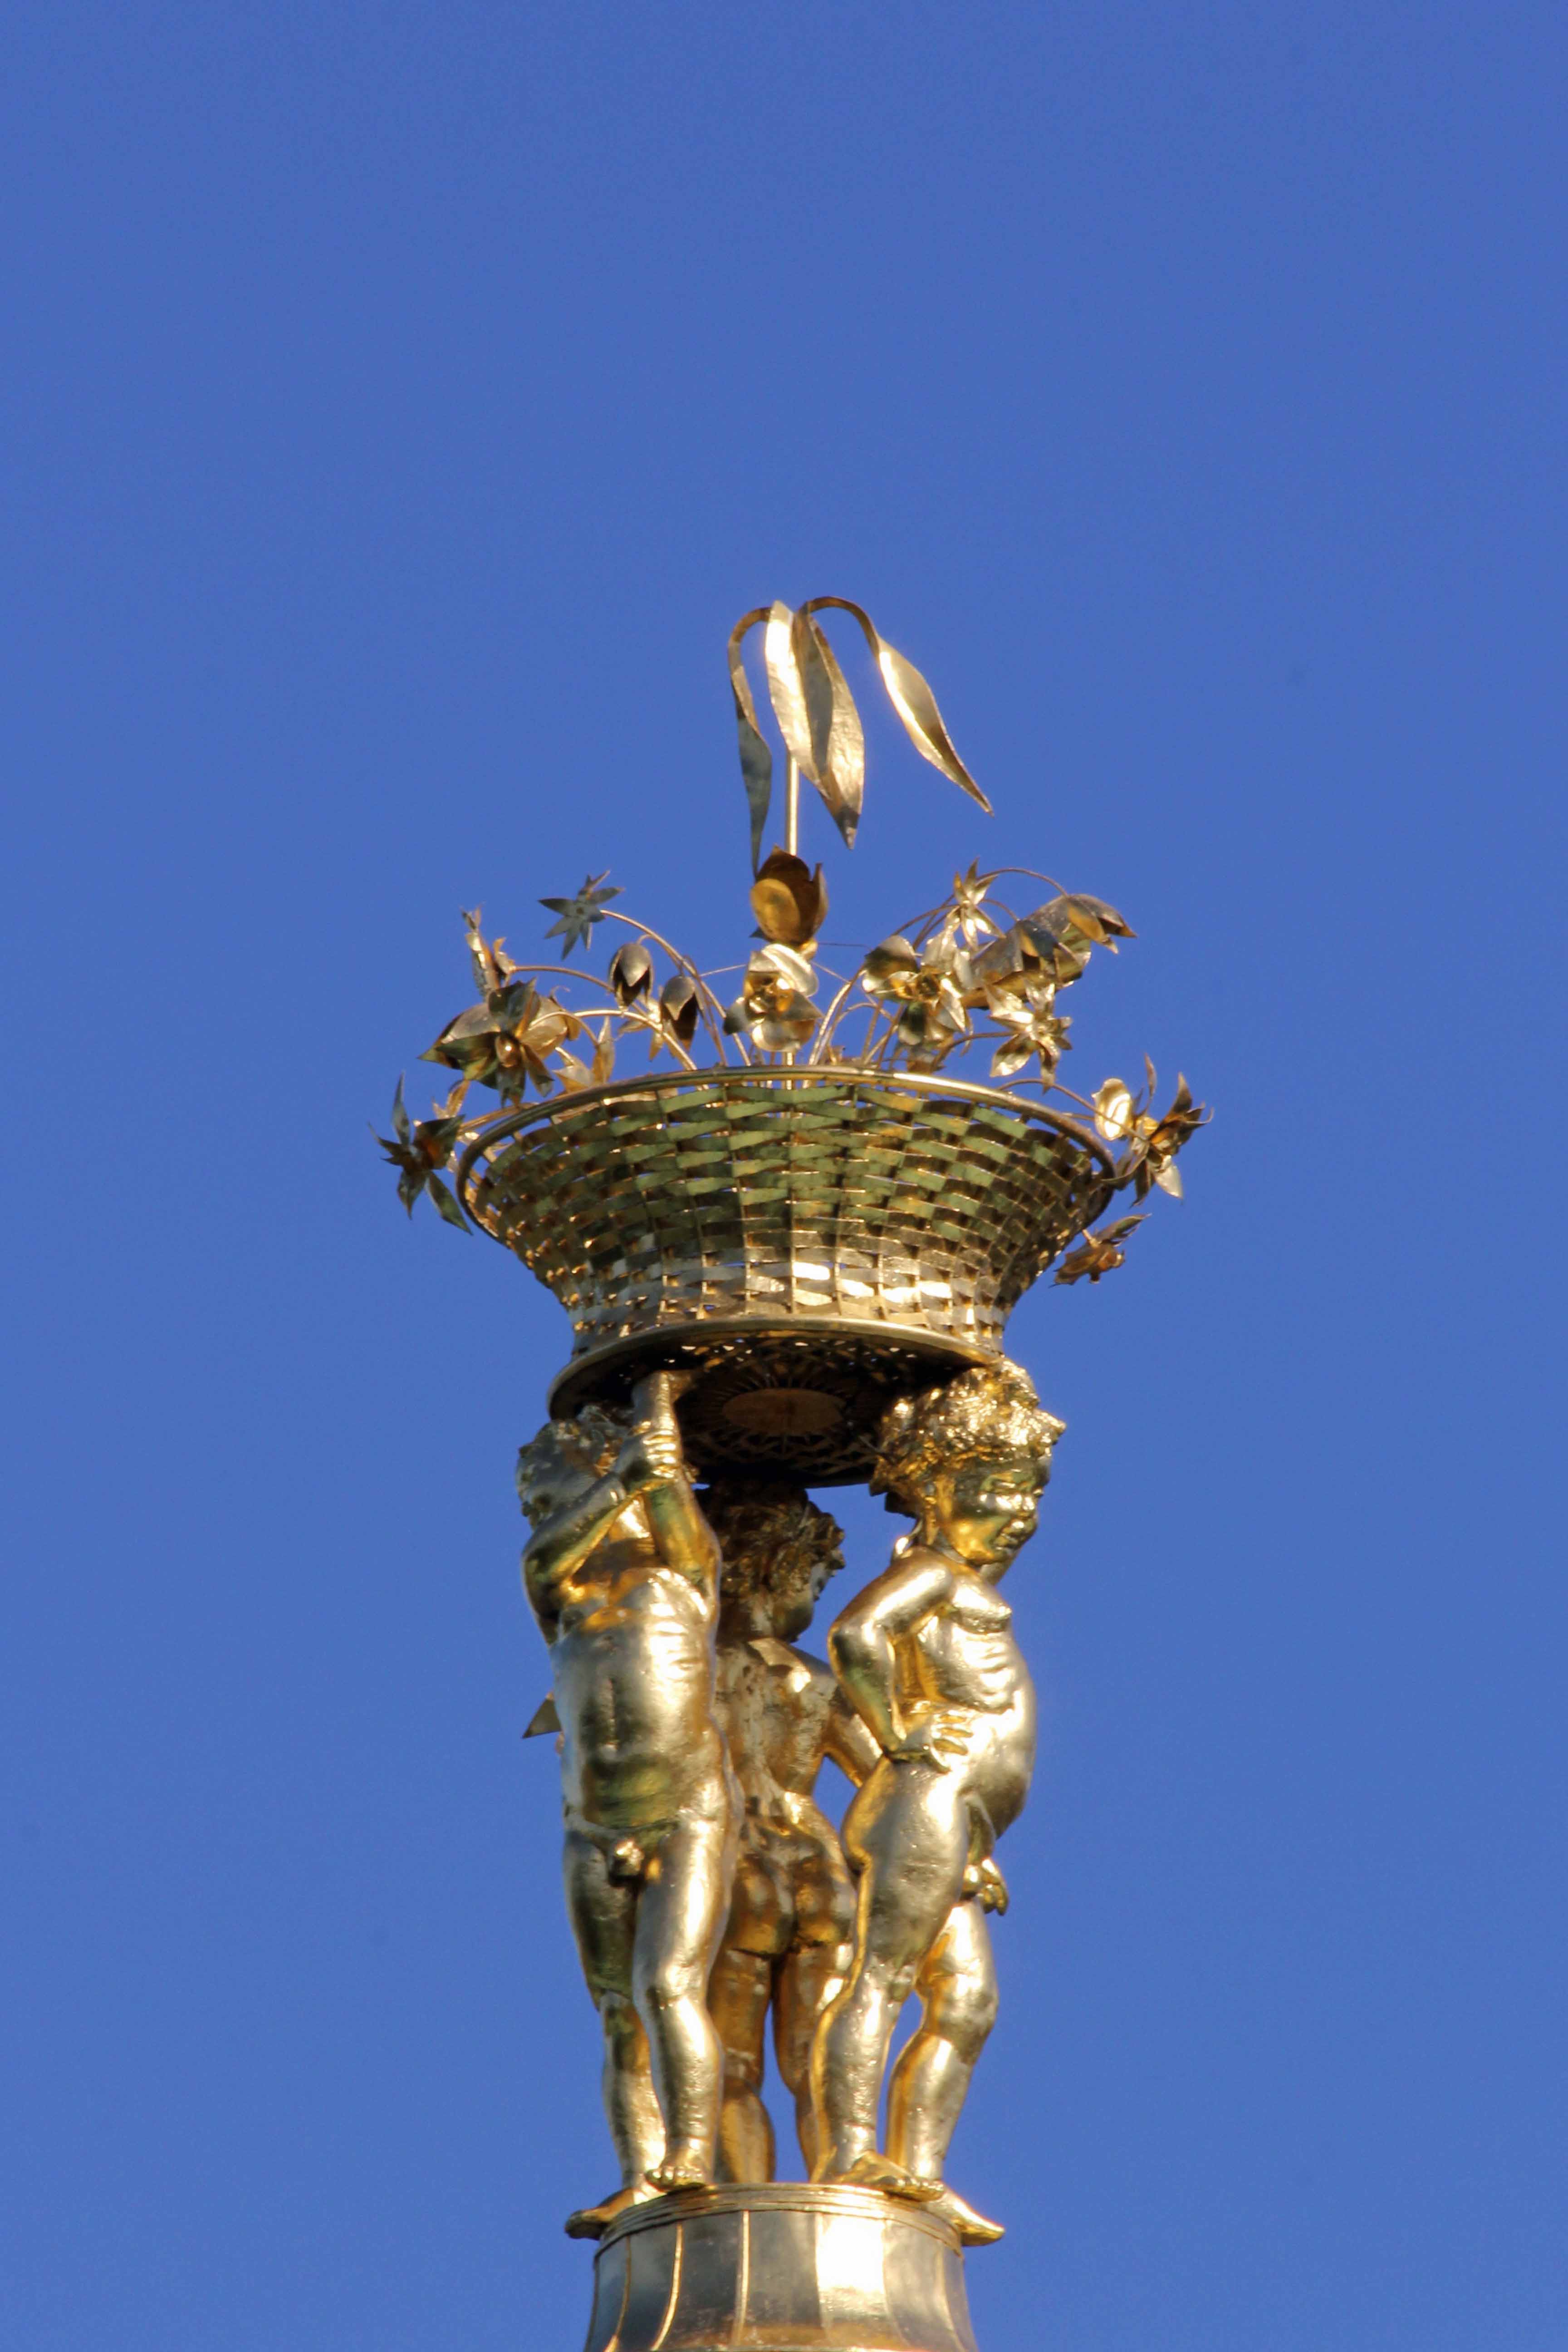 A gold statue atop The Belvedere in the Palace Gardens of Schloss Charlottenburg in Berlin